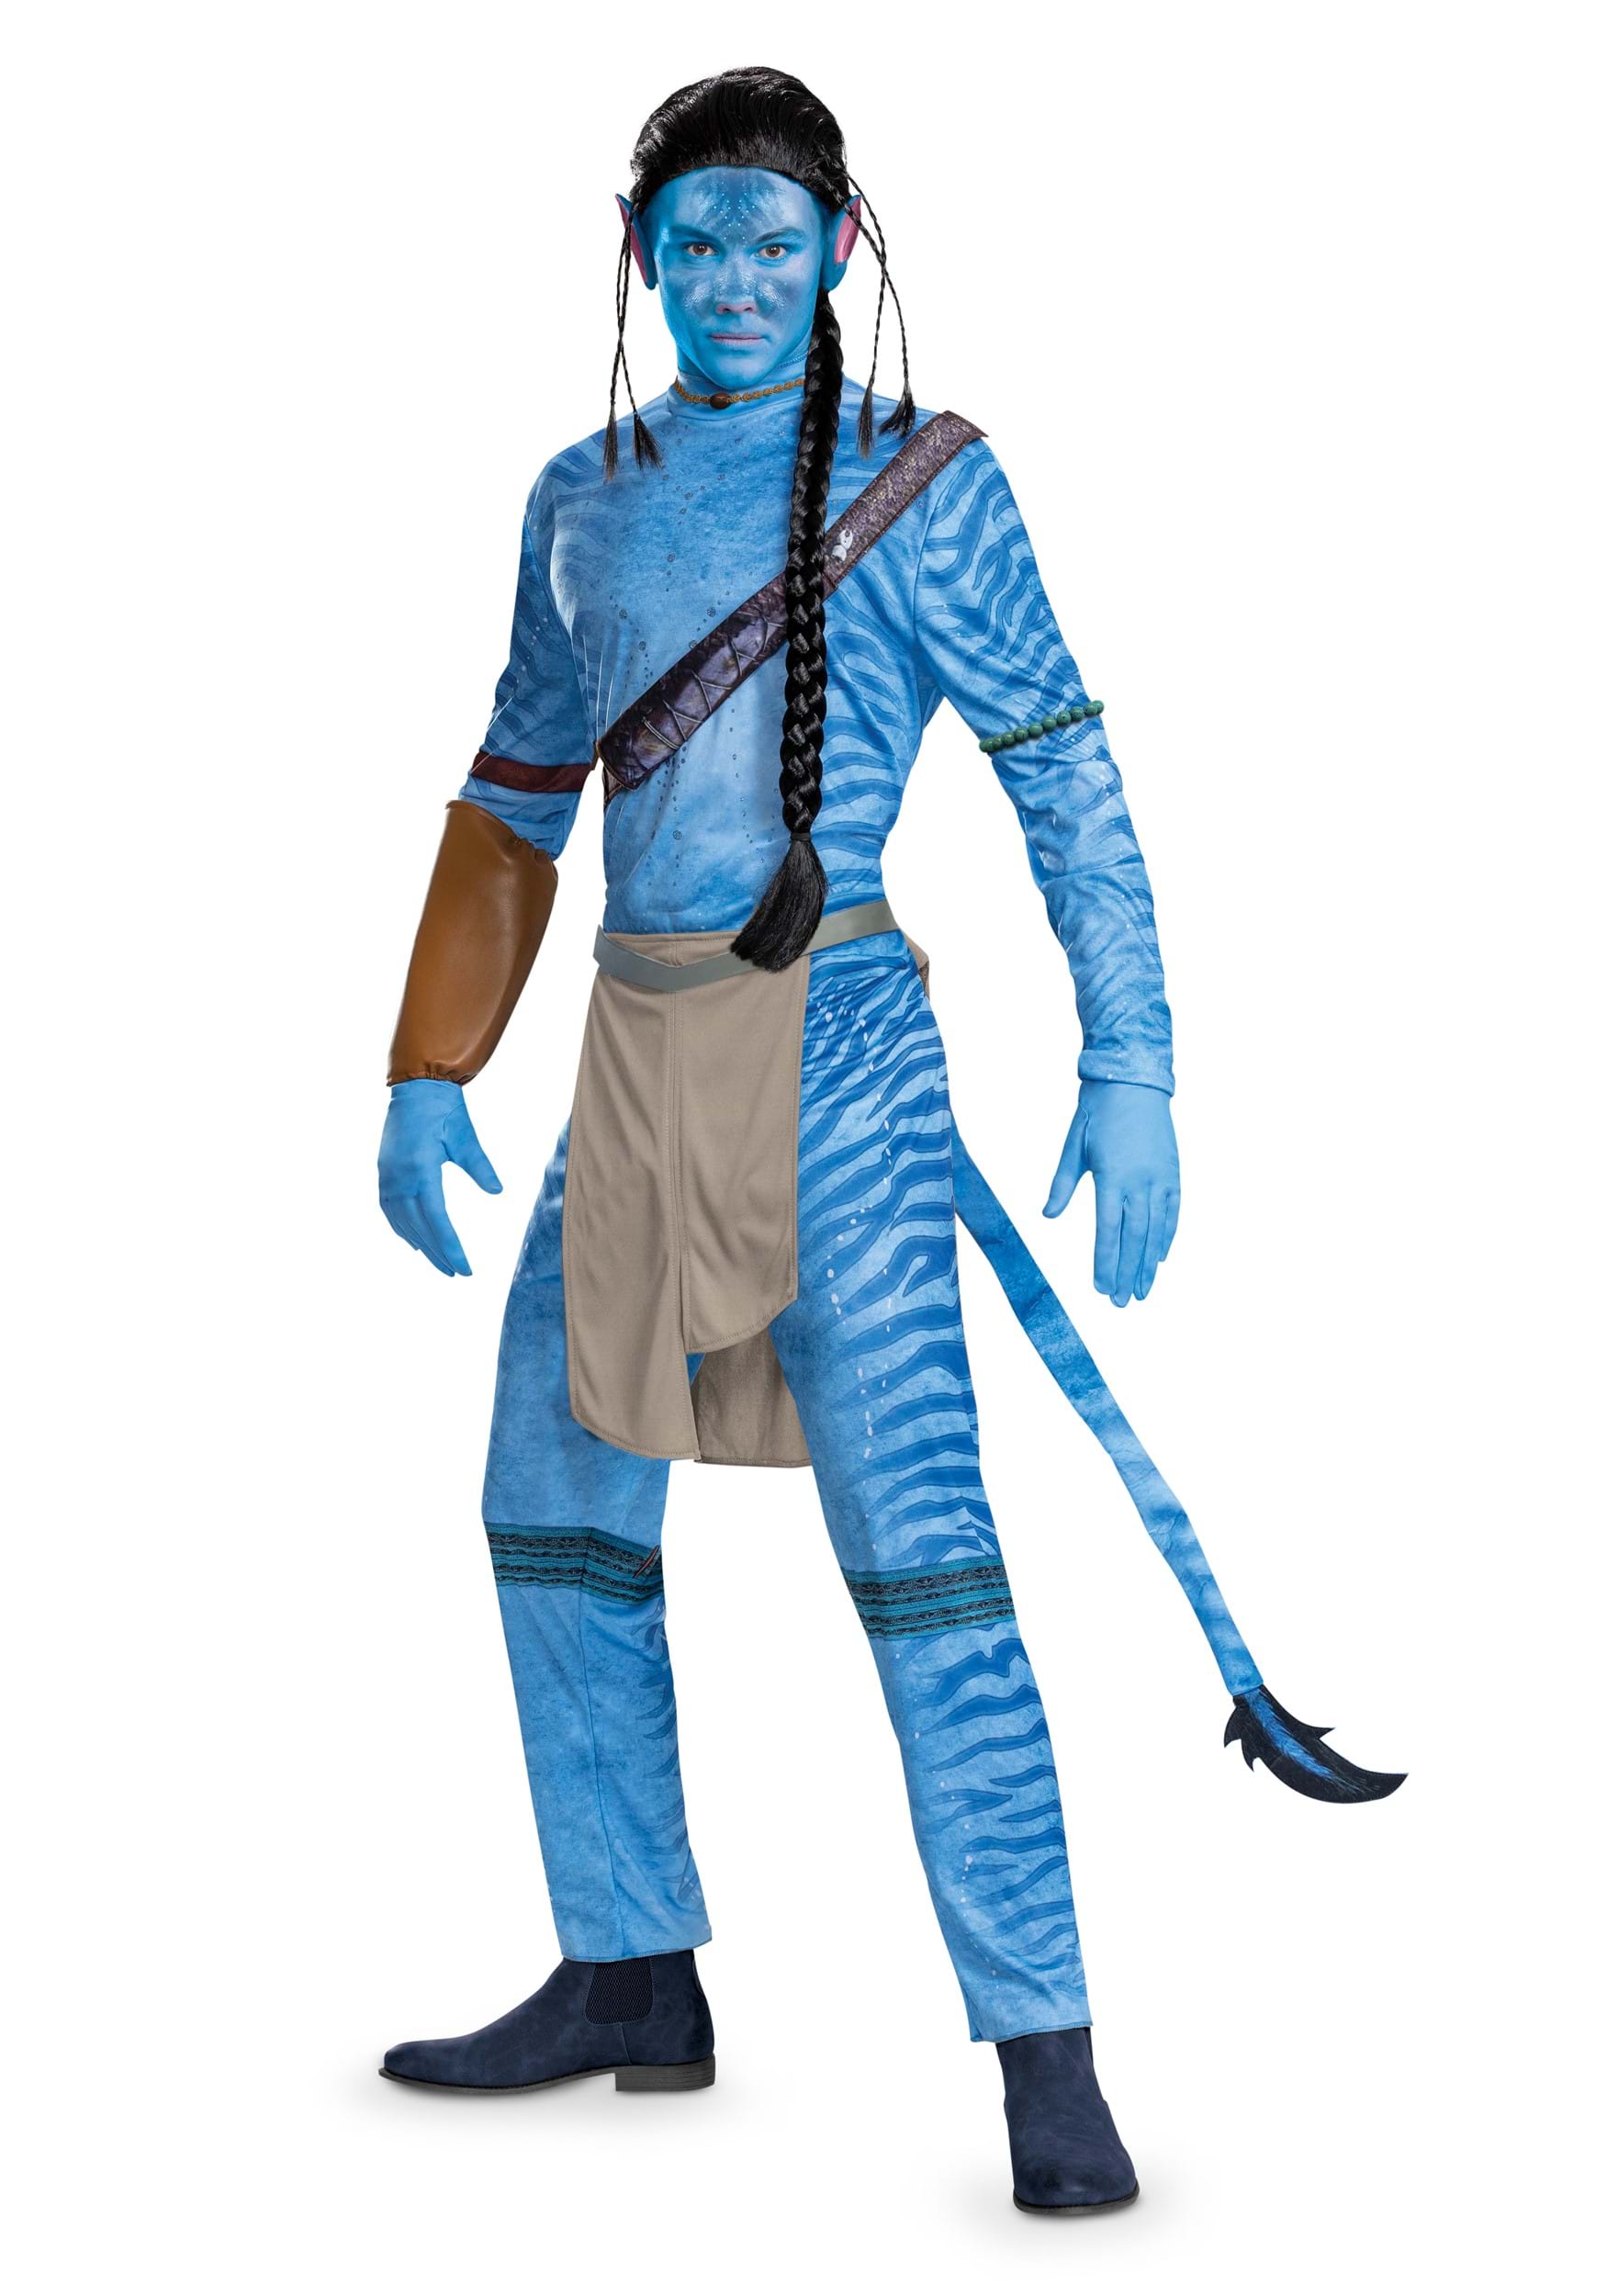 Photos - Fancy Dress Avatar Disguise  Men's Deluxe Jake  Costume Brown/Blue DI129 